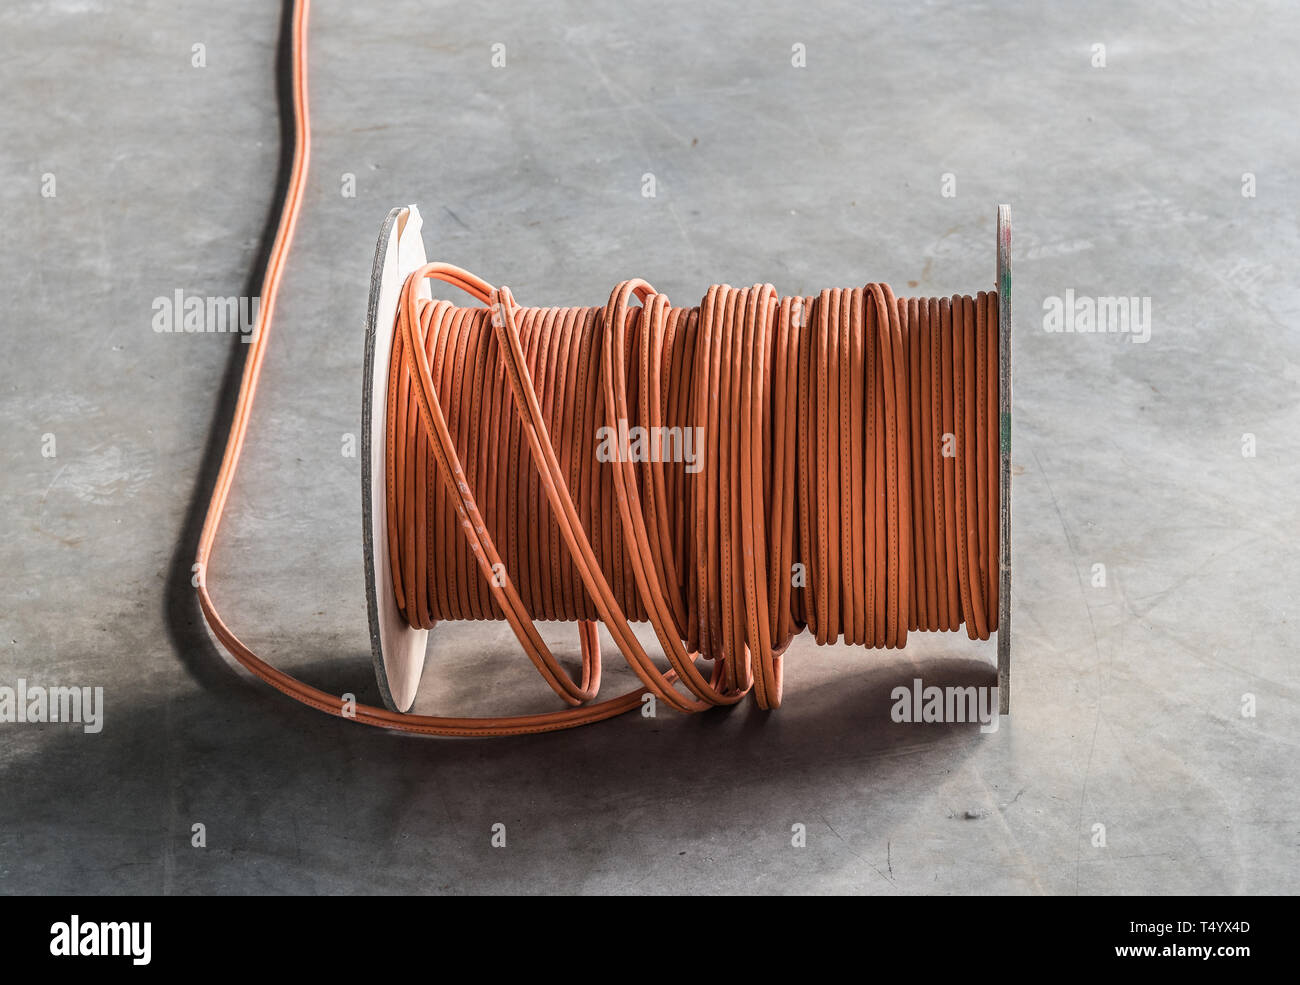 large roll of communications cable on concrete floor at construction site Stock Photo